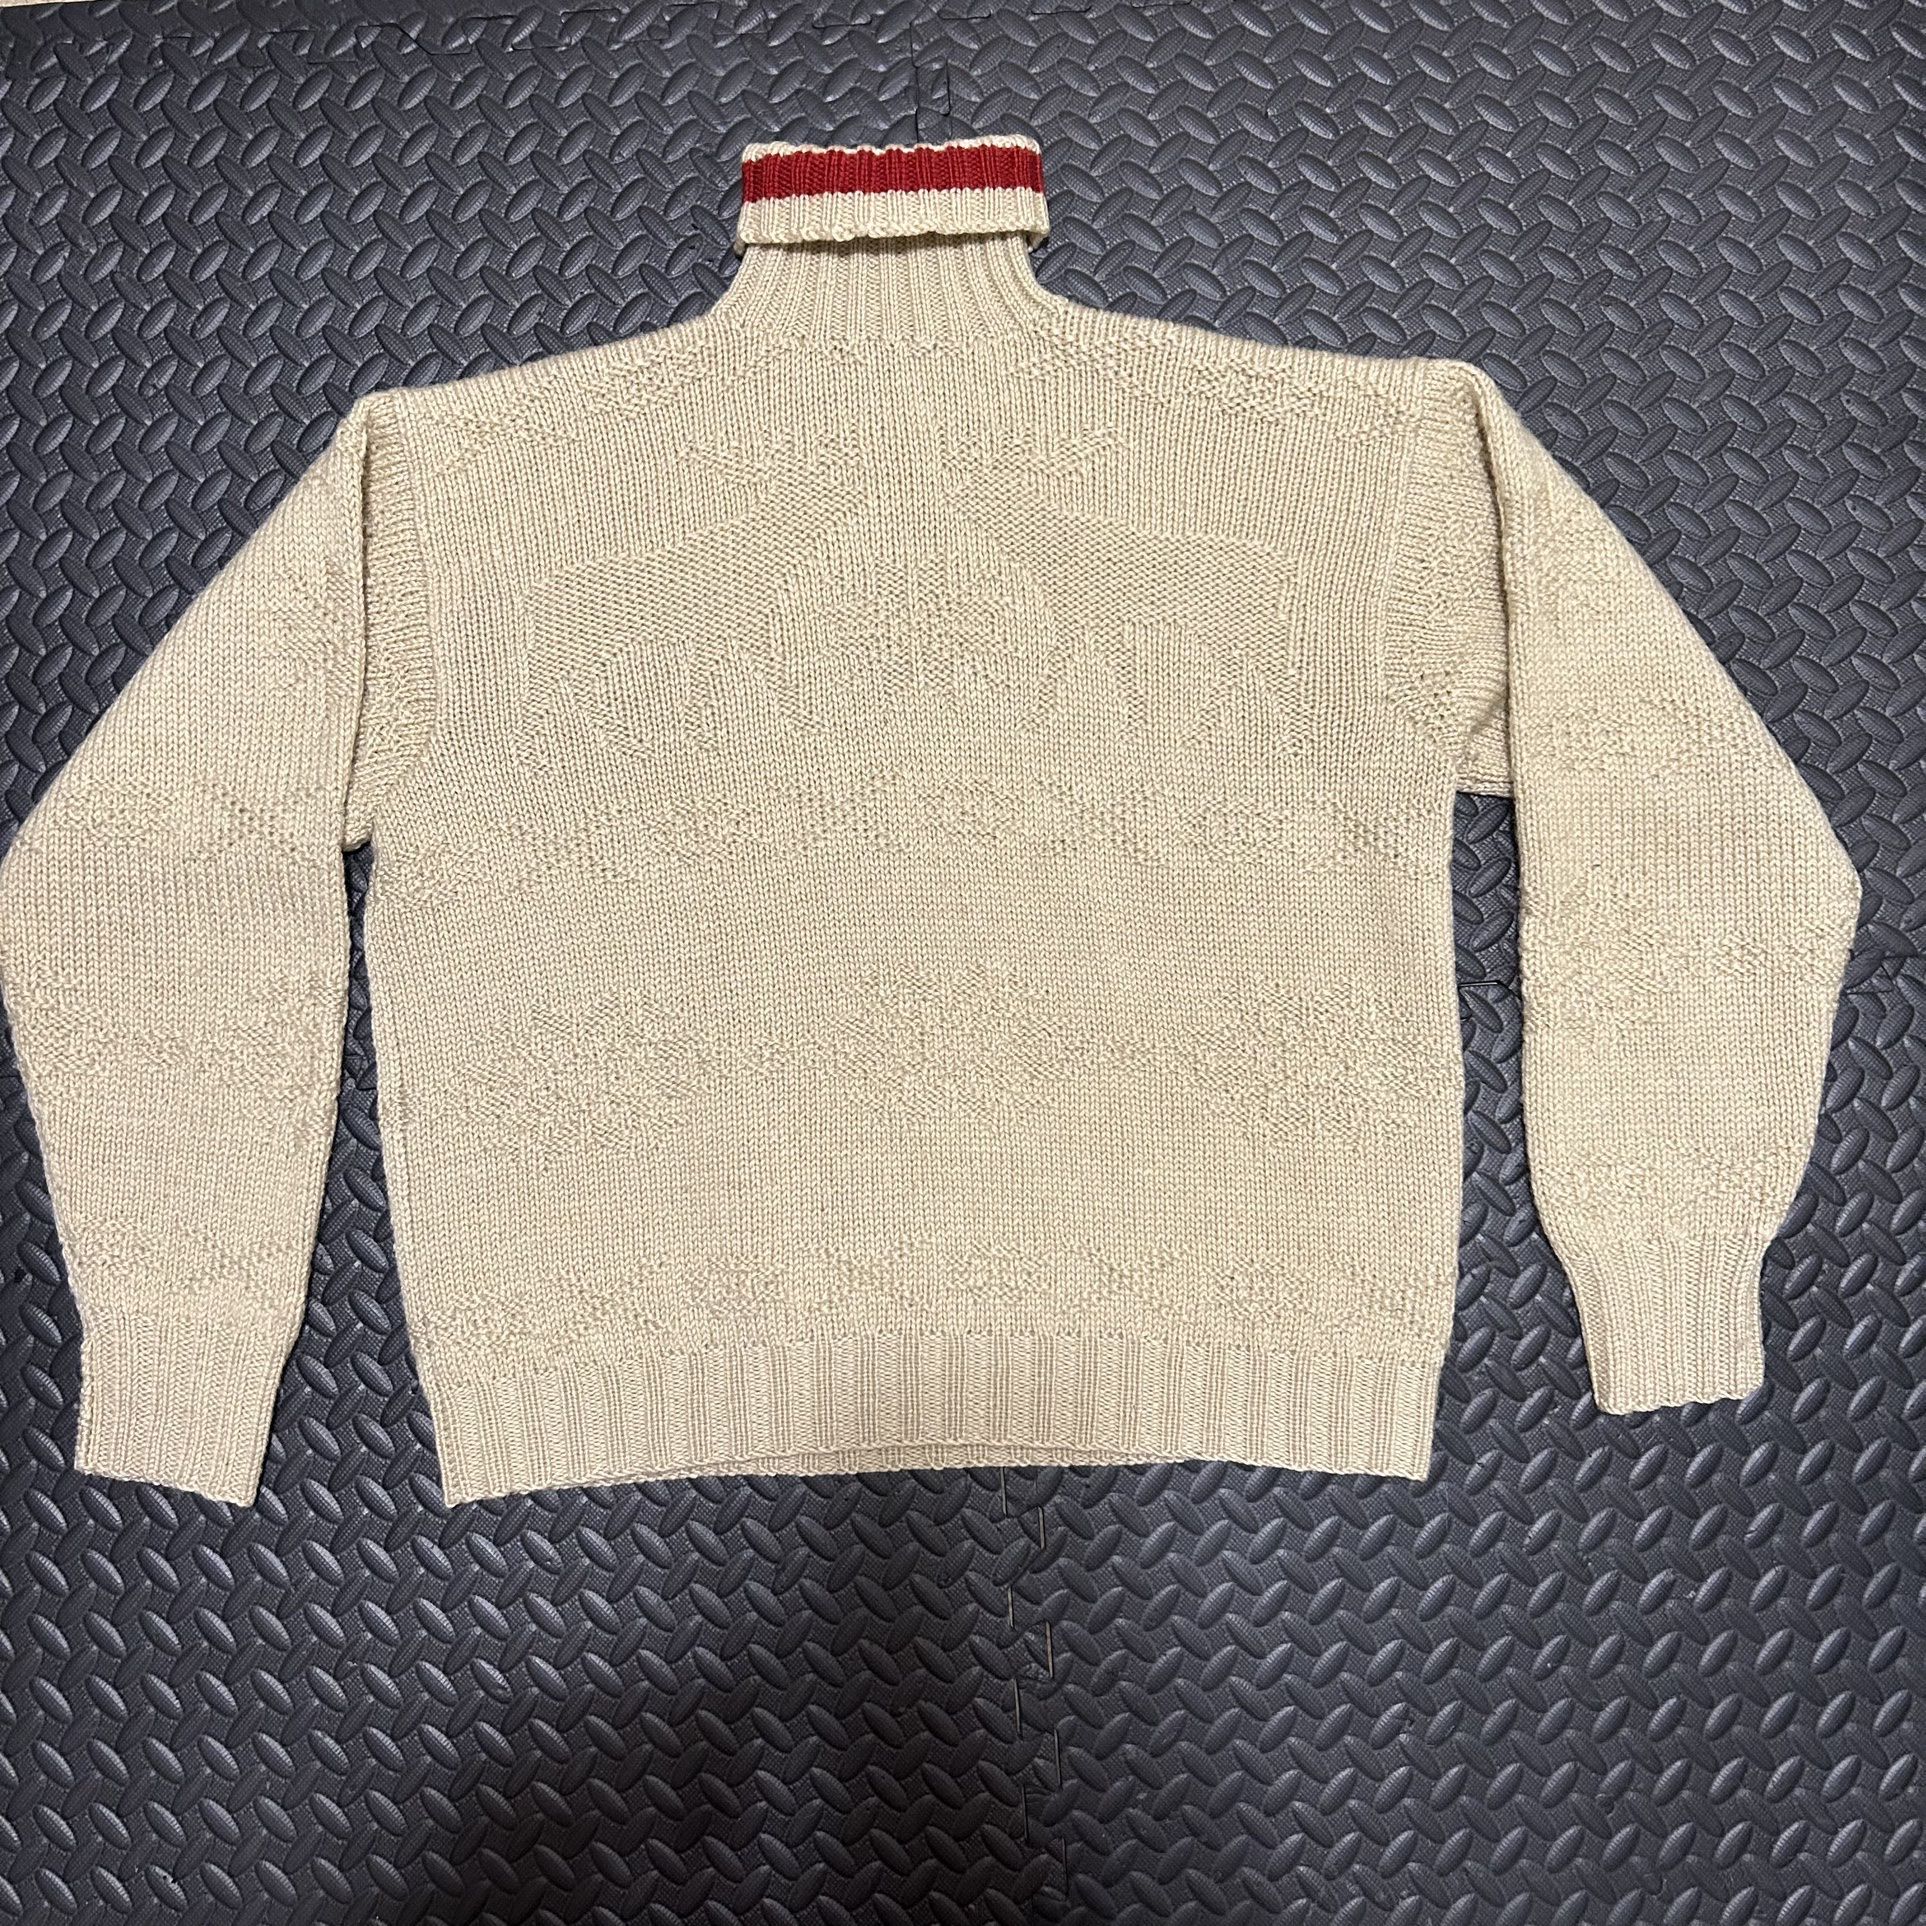 VTG Polo Ralph Lauren Hand Large Knit Wool Cream Turtleneck Sweater Moose  XMas for Sale in Alsip, IL - OfferUp